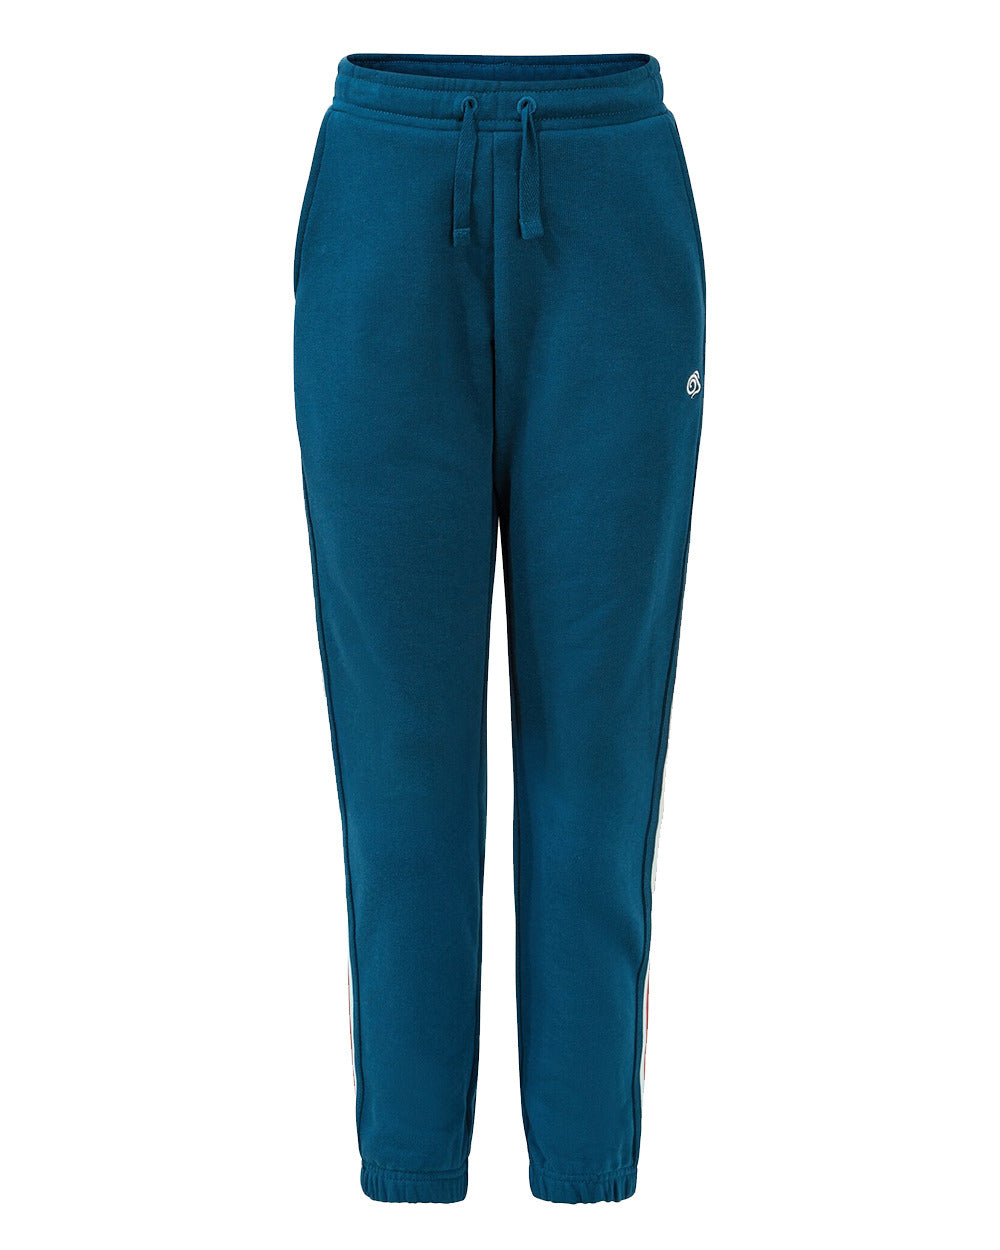 Poseidon Blue Coloured Craghoppers Childrens NosiLife Brodie Trousers On A White Background 